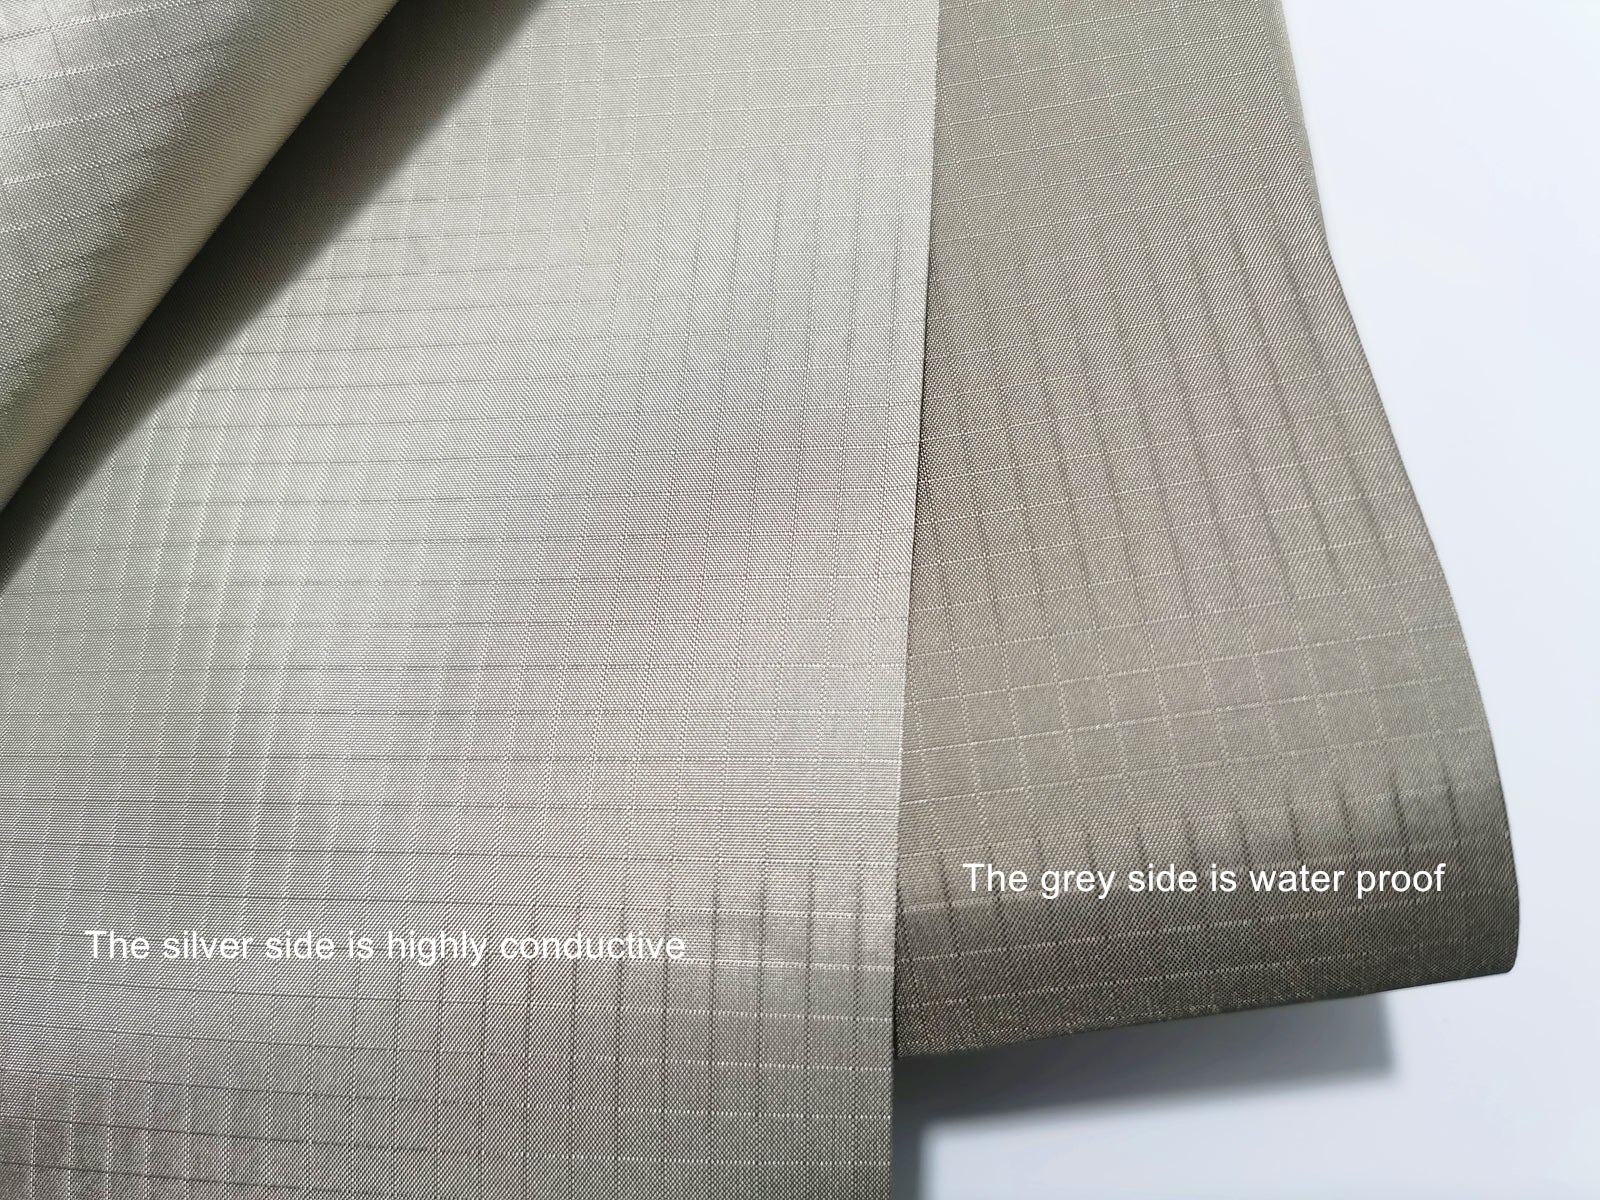 5G EMF Blocking Fabric for Electromagnetic Shielding Effectiveness Waterproof Indoor and Outdoor Usage